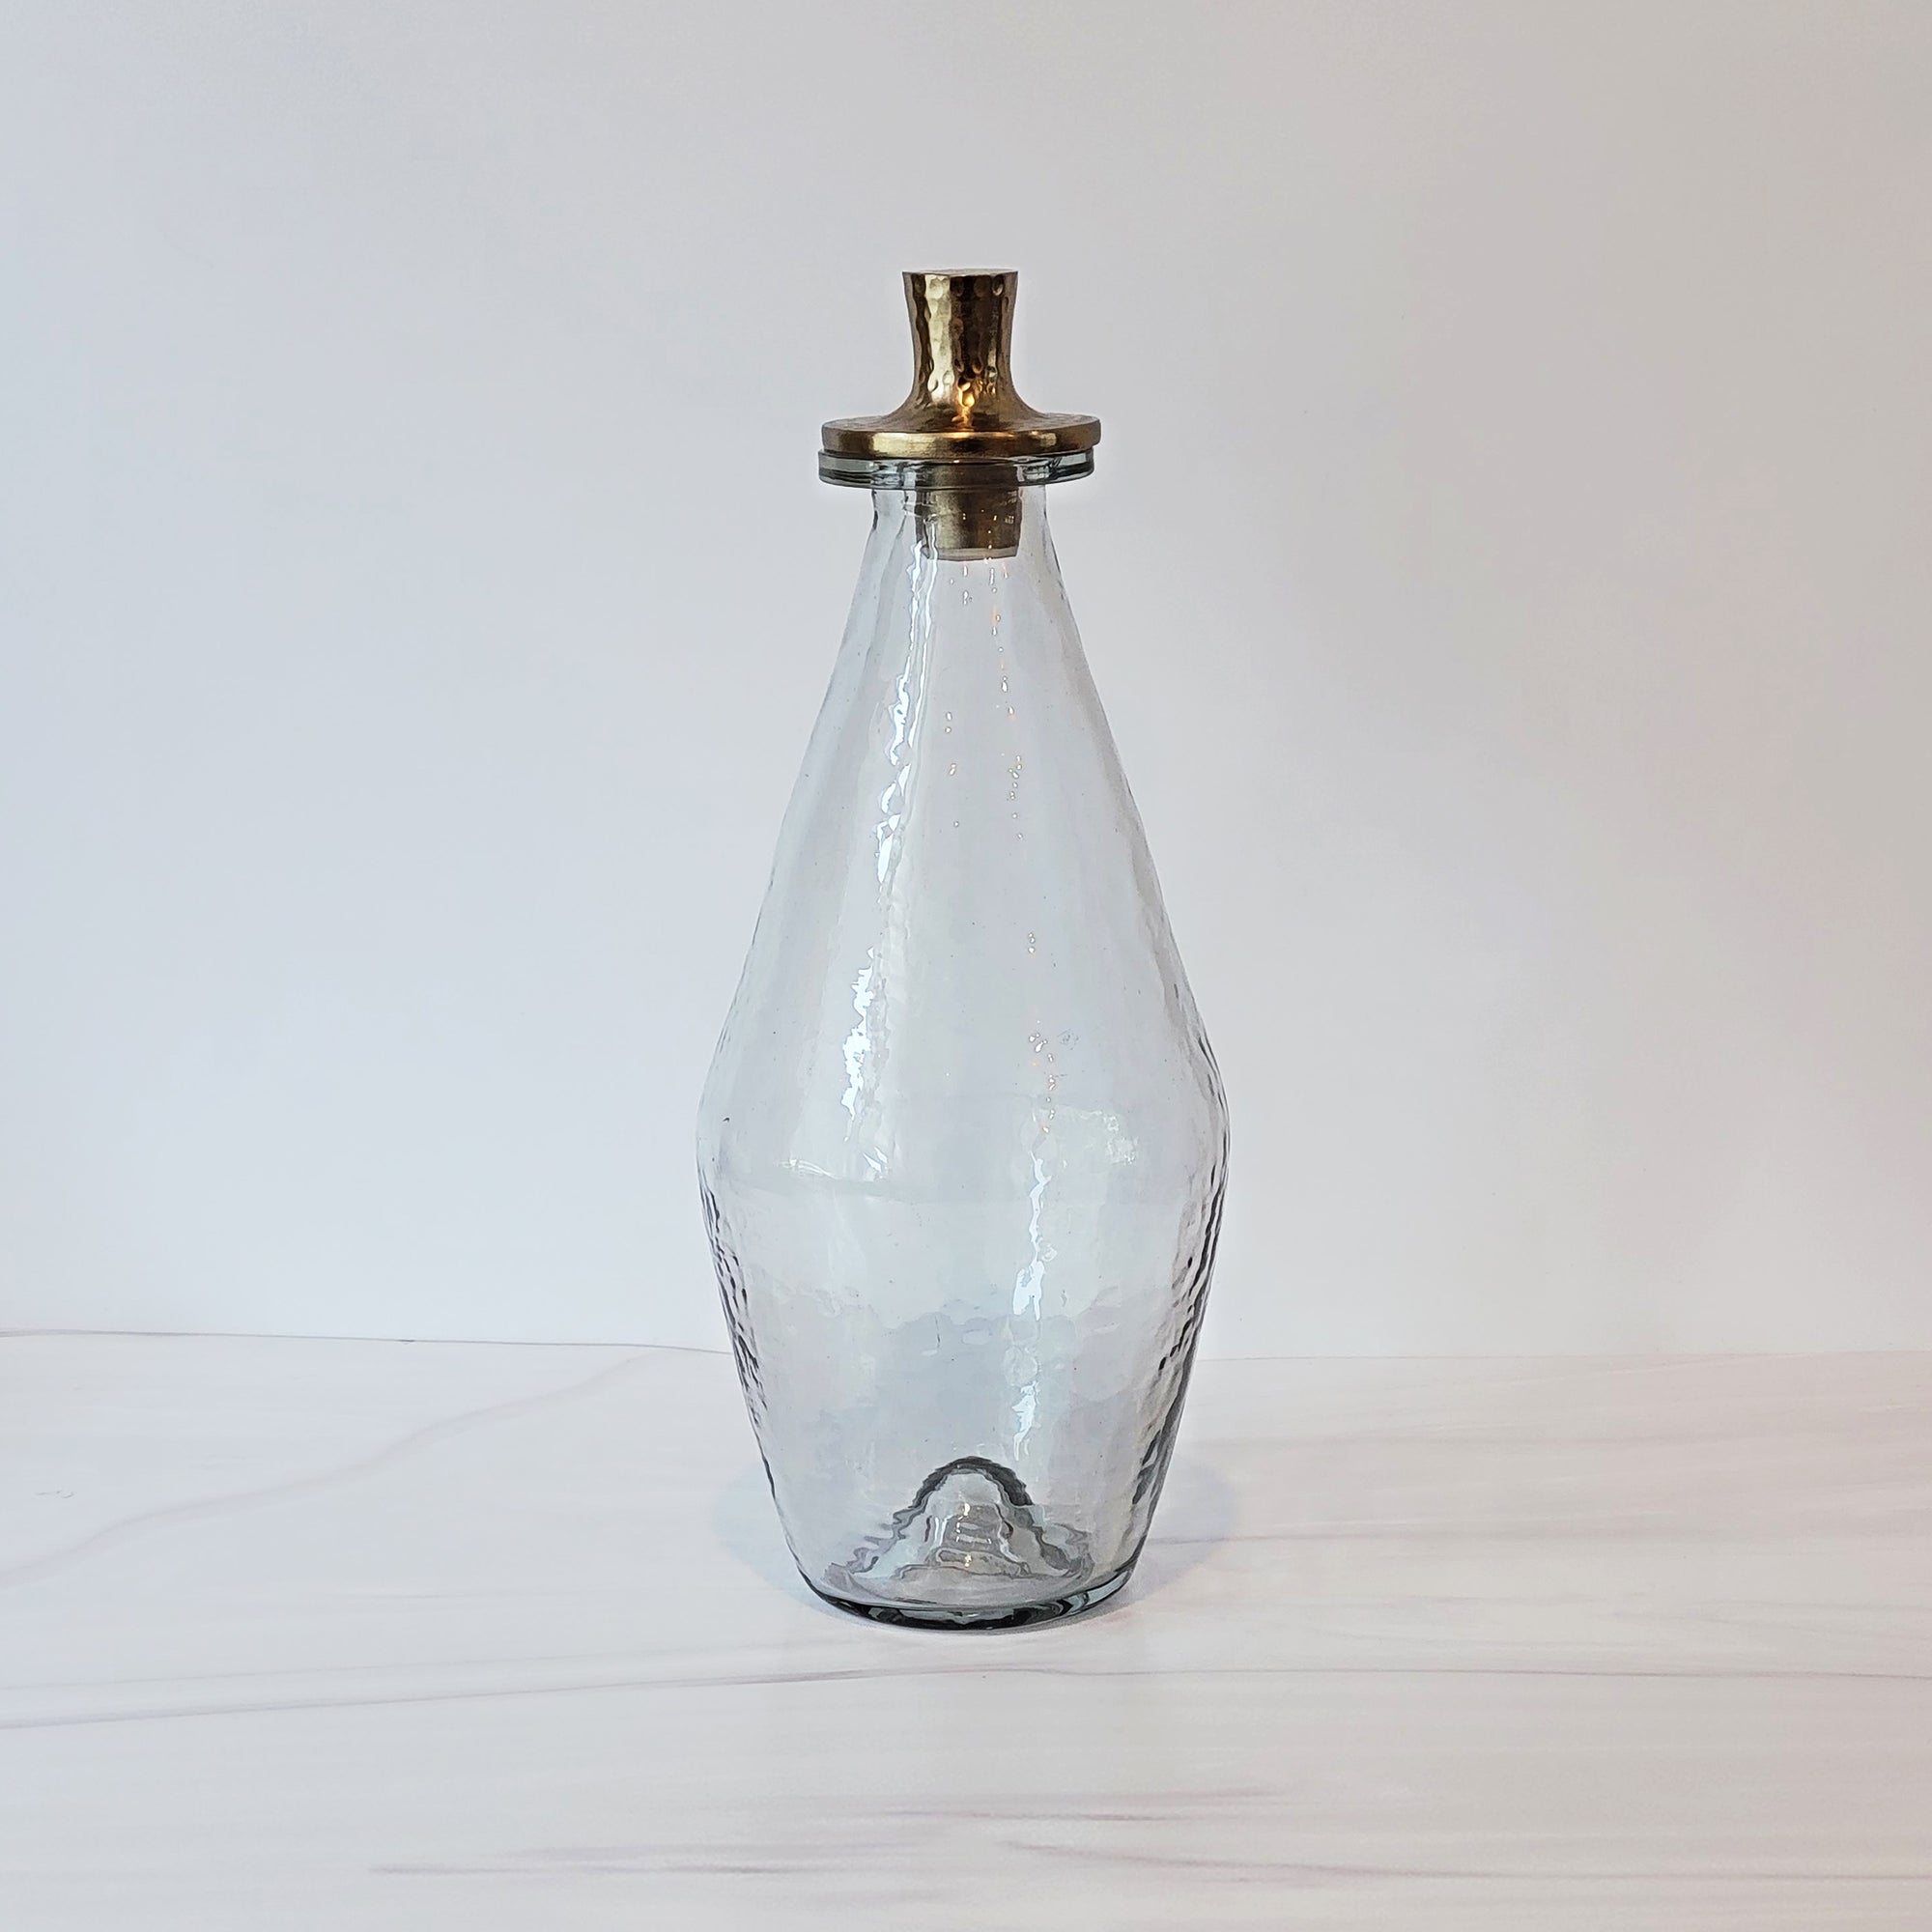 Pebbled glass and brass & steel decanter